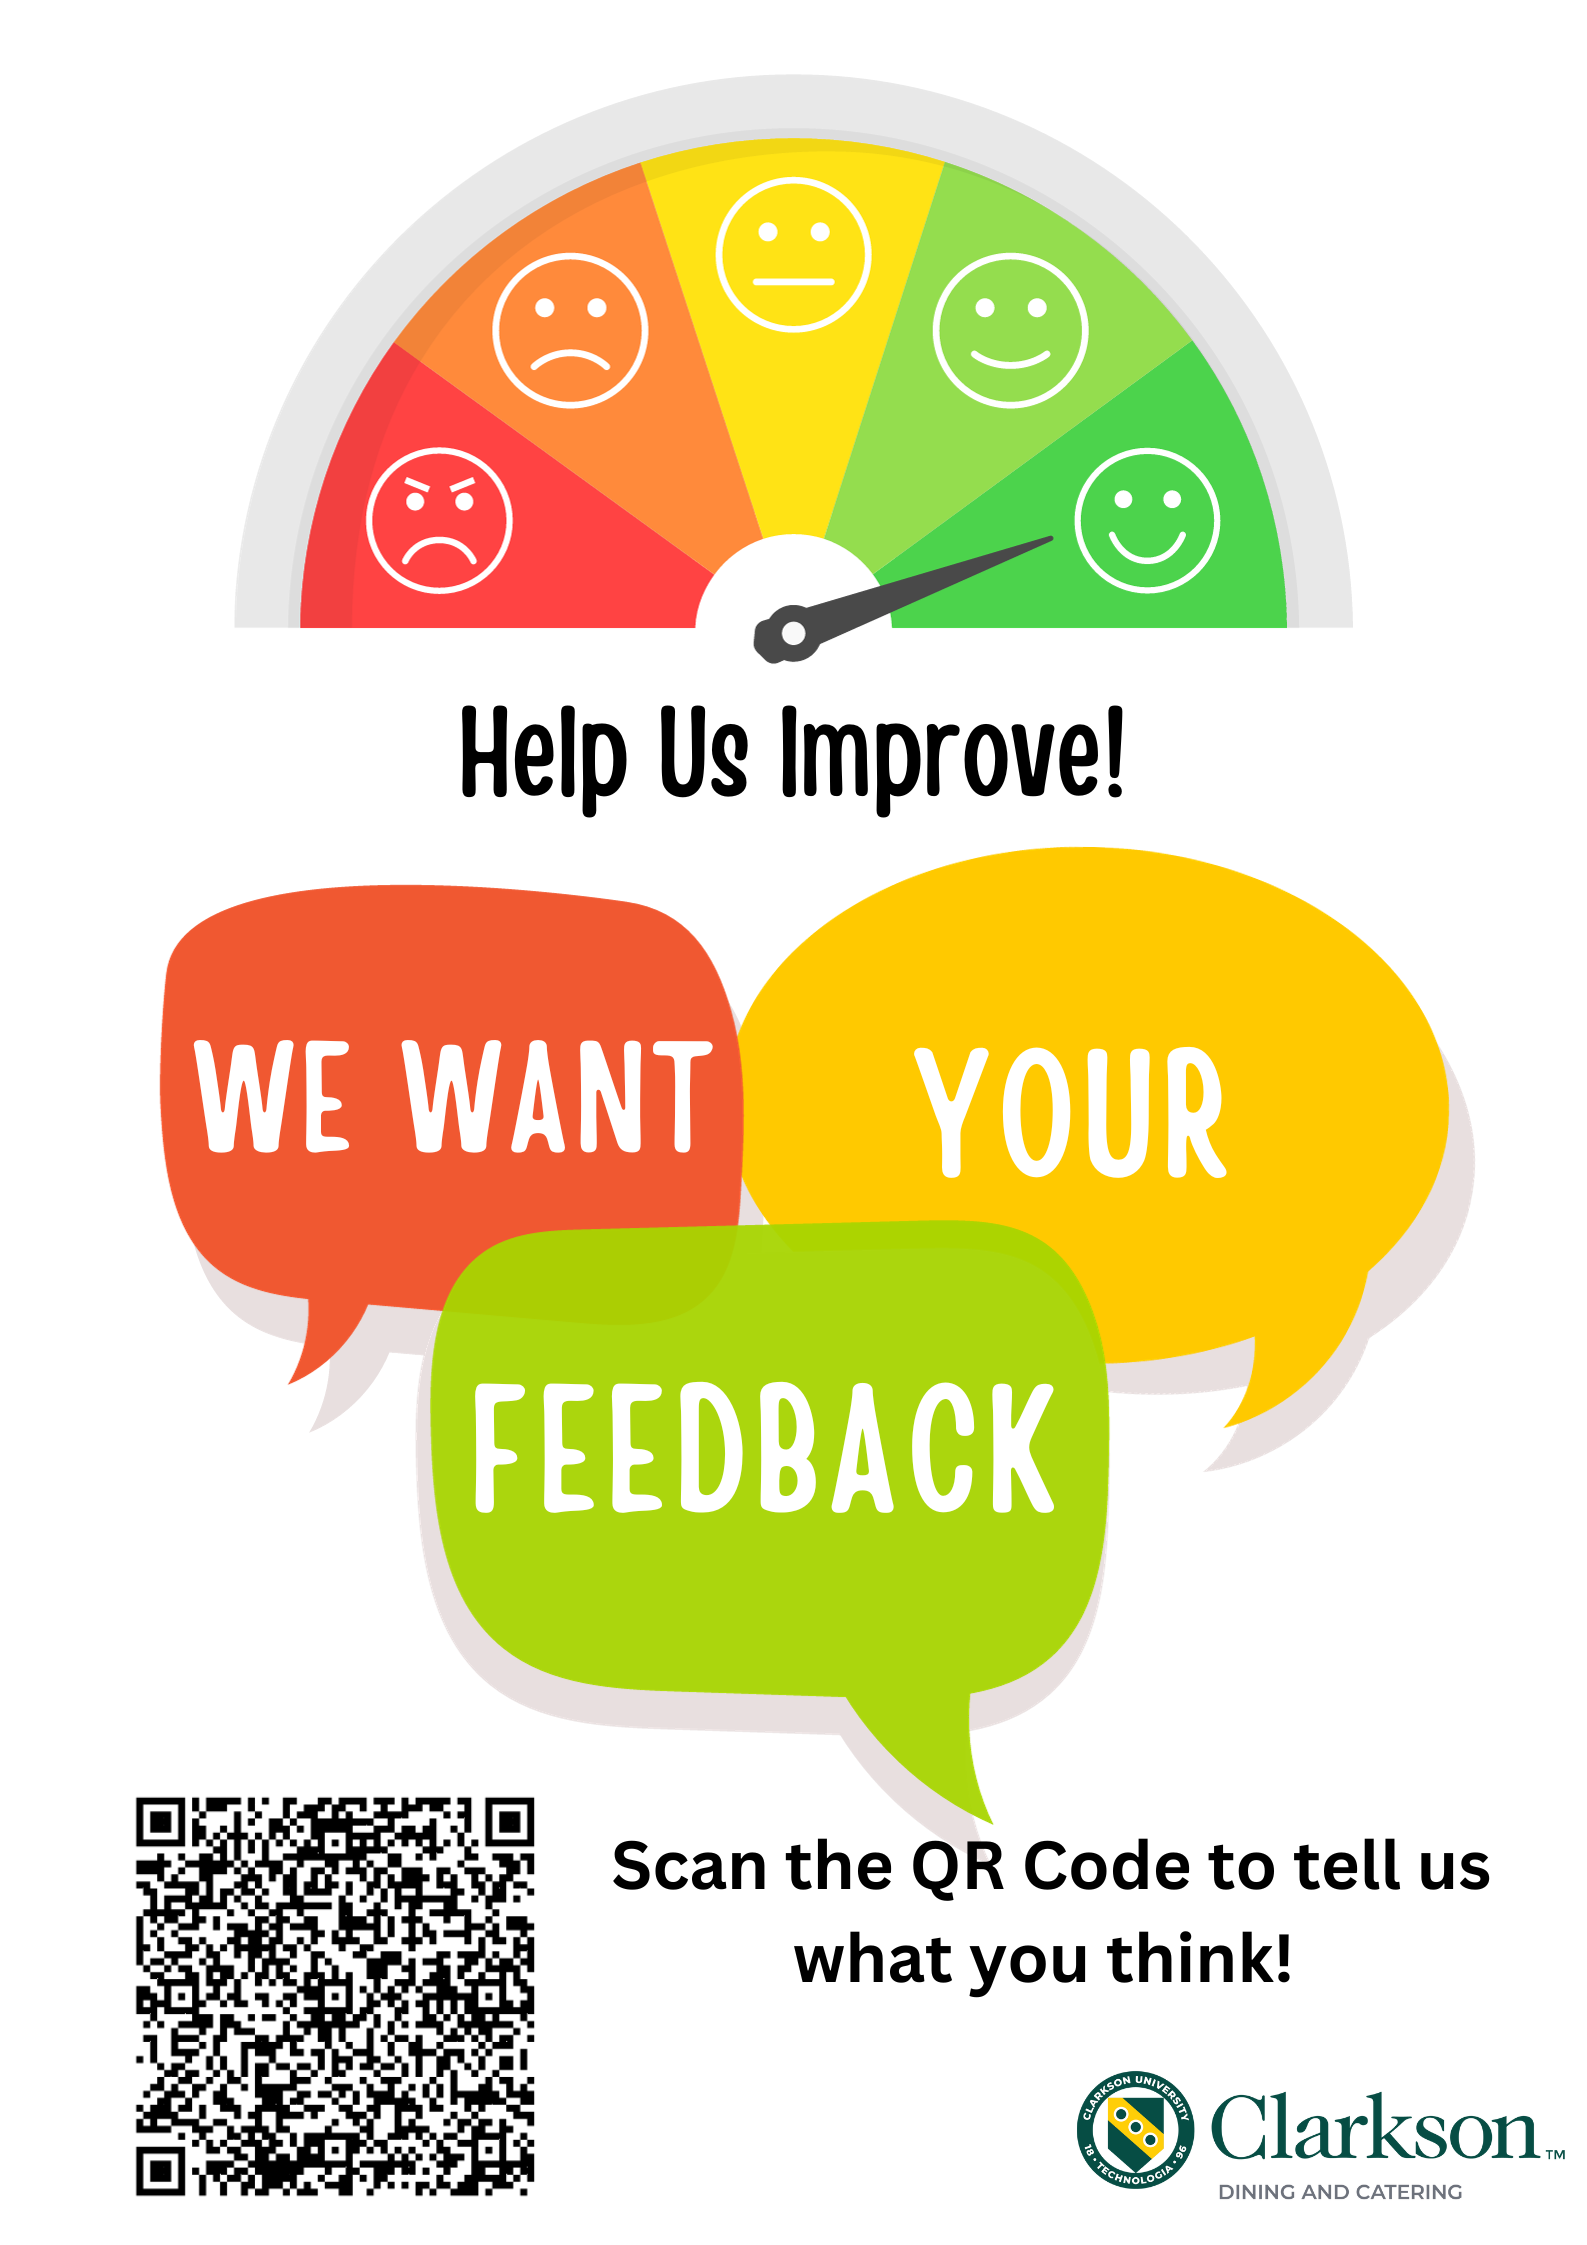 Flyer with image of a moving needle showing five colored sections from red with an angry face to green with a happy face. "Help Us Improve" We want your feedback. Scan the QR Code to tell us what you think: http://tinyurl.com/5n646bjs